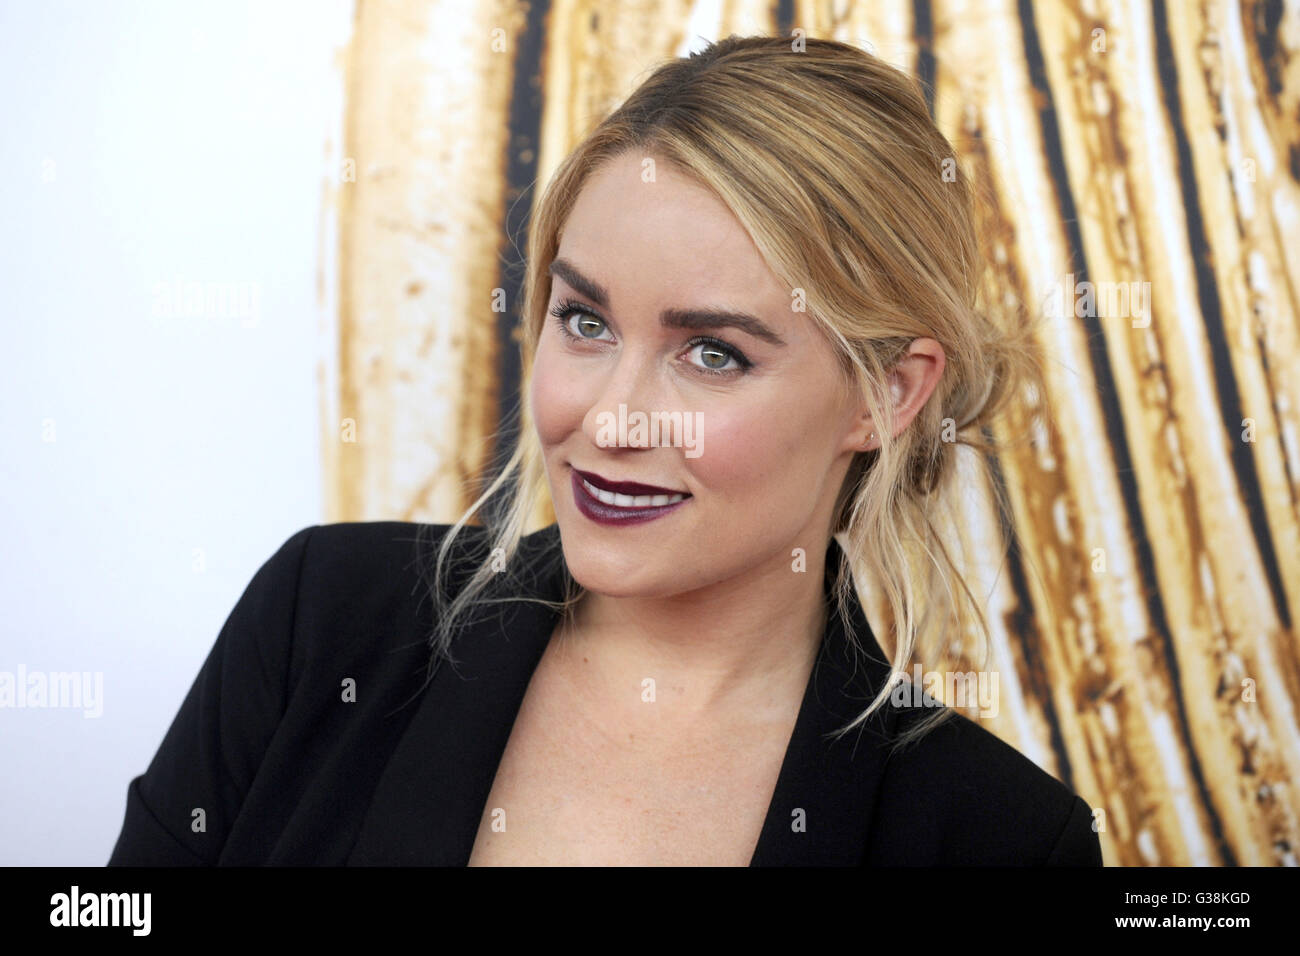 Lauren Conrad wears a new hairstyle during a photoshoot in West Hollywood  Los Angeles, California - 12.06.09 Stock Photo - Alamy